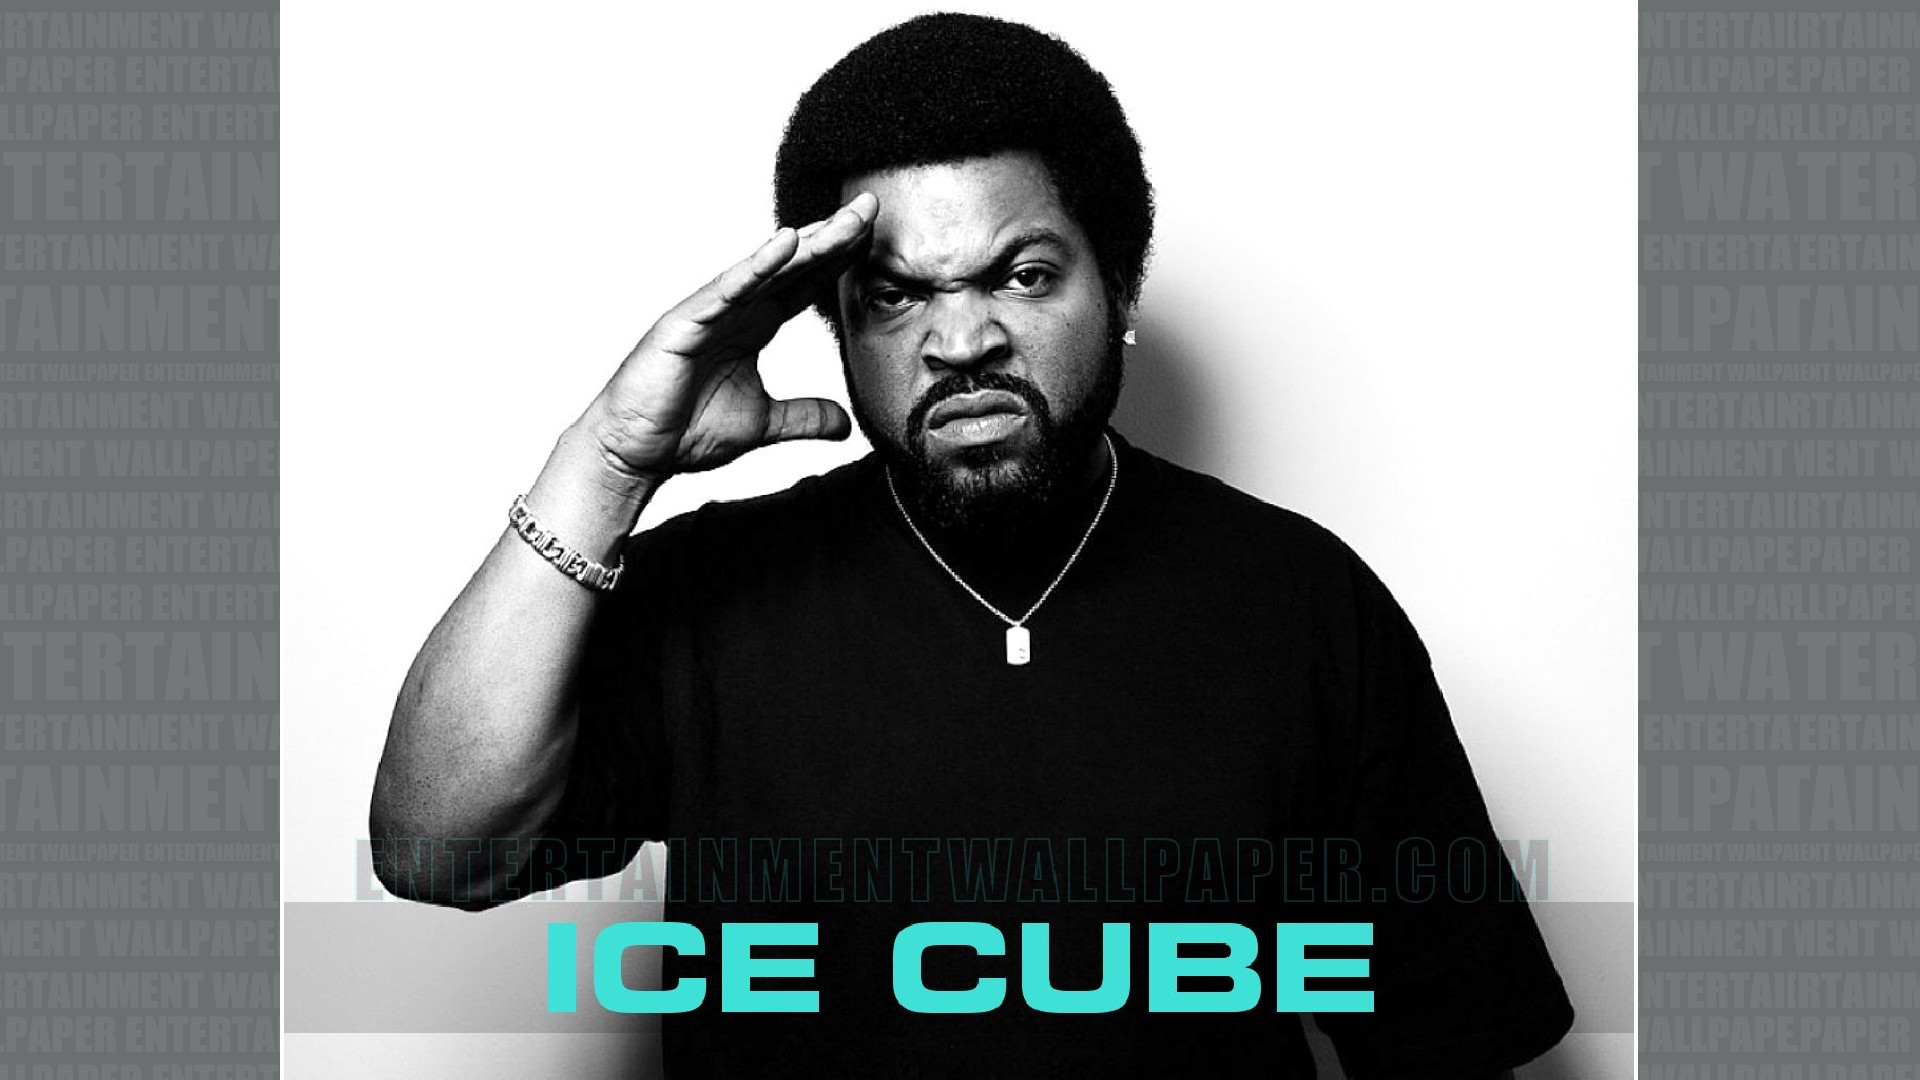 Ice Cube Wallpaper – Original size, download now.